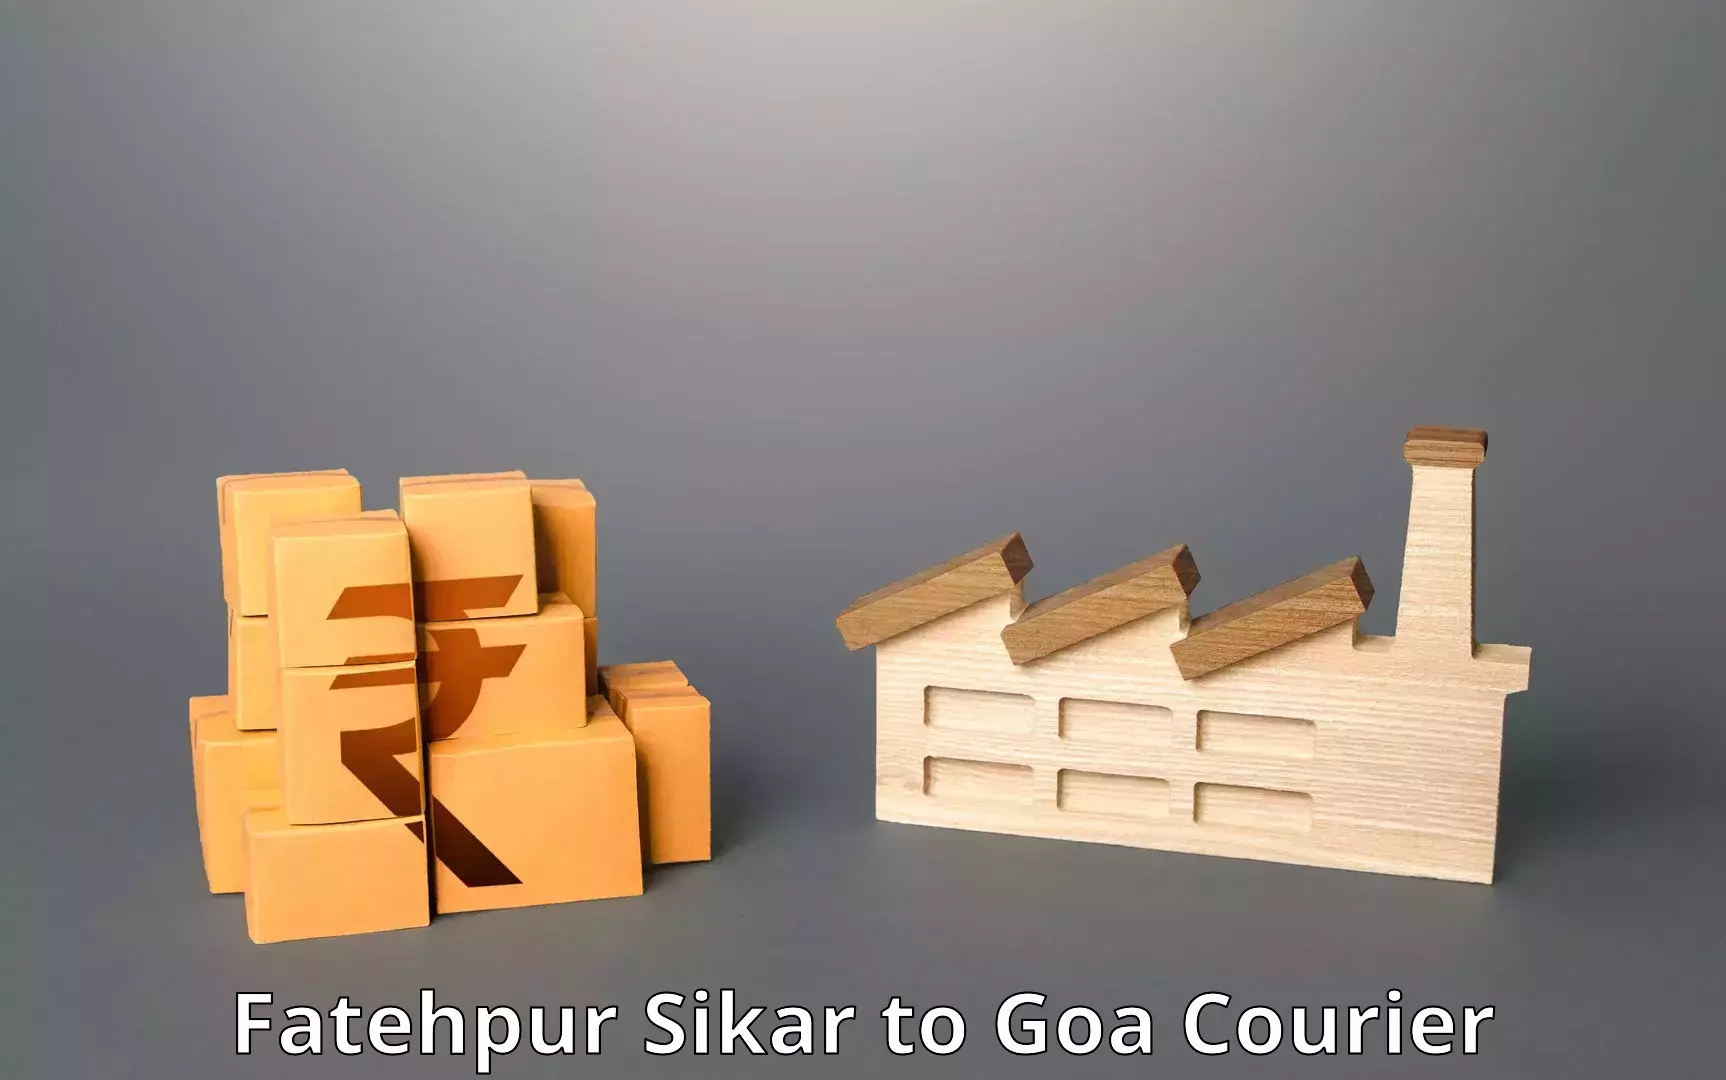 Full-service courier options Fatehpur Sikar to Margao